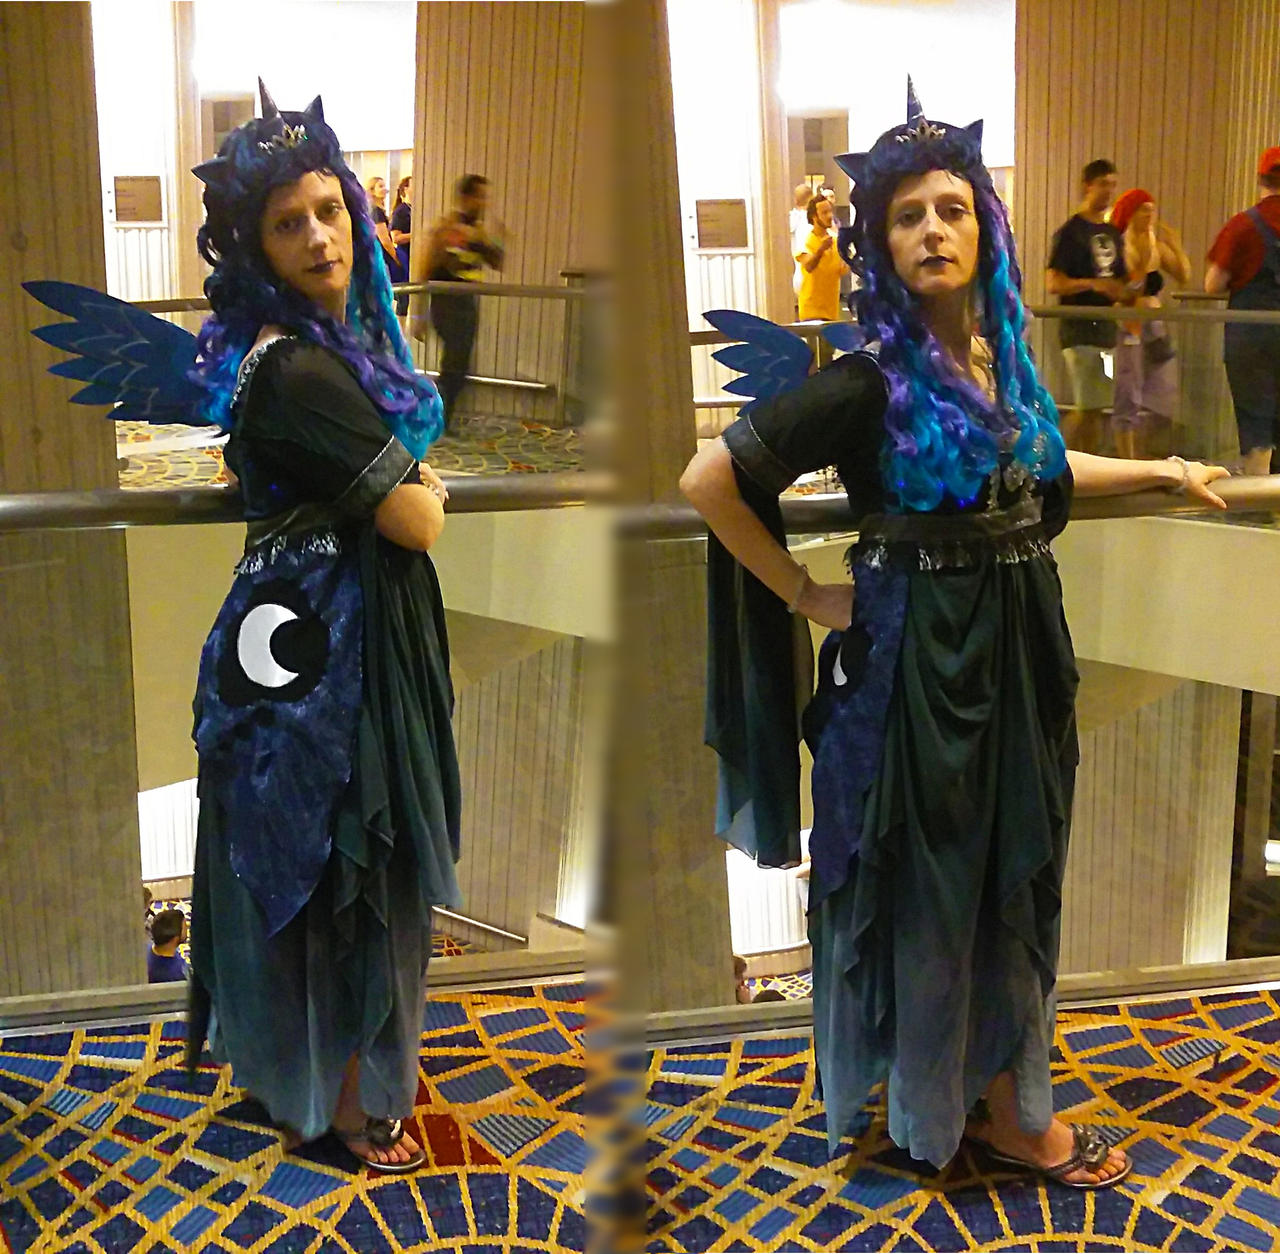 Cosplay: Princess Luna from My Little Pony